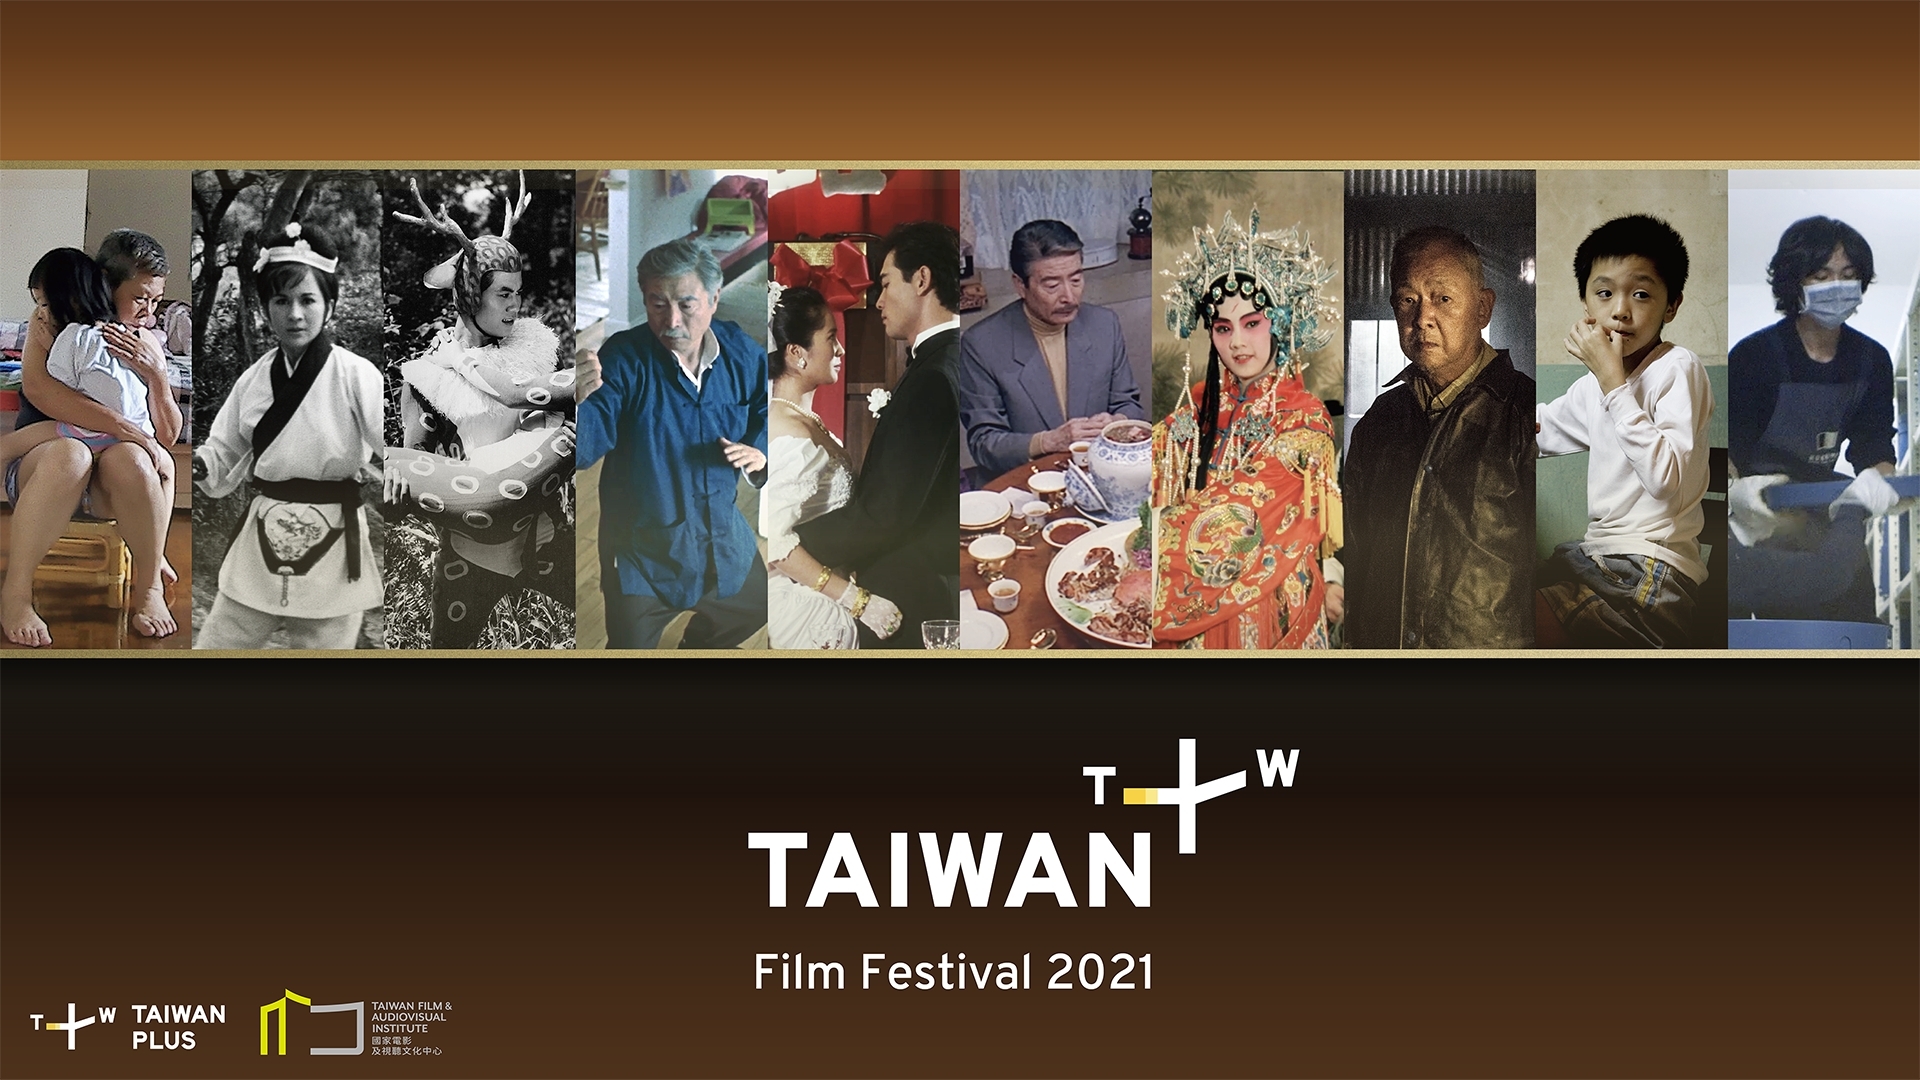 TaiwanPlus Film Festival 2021 Brings Taiwan to the World with 10